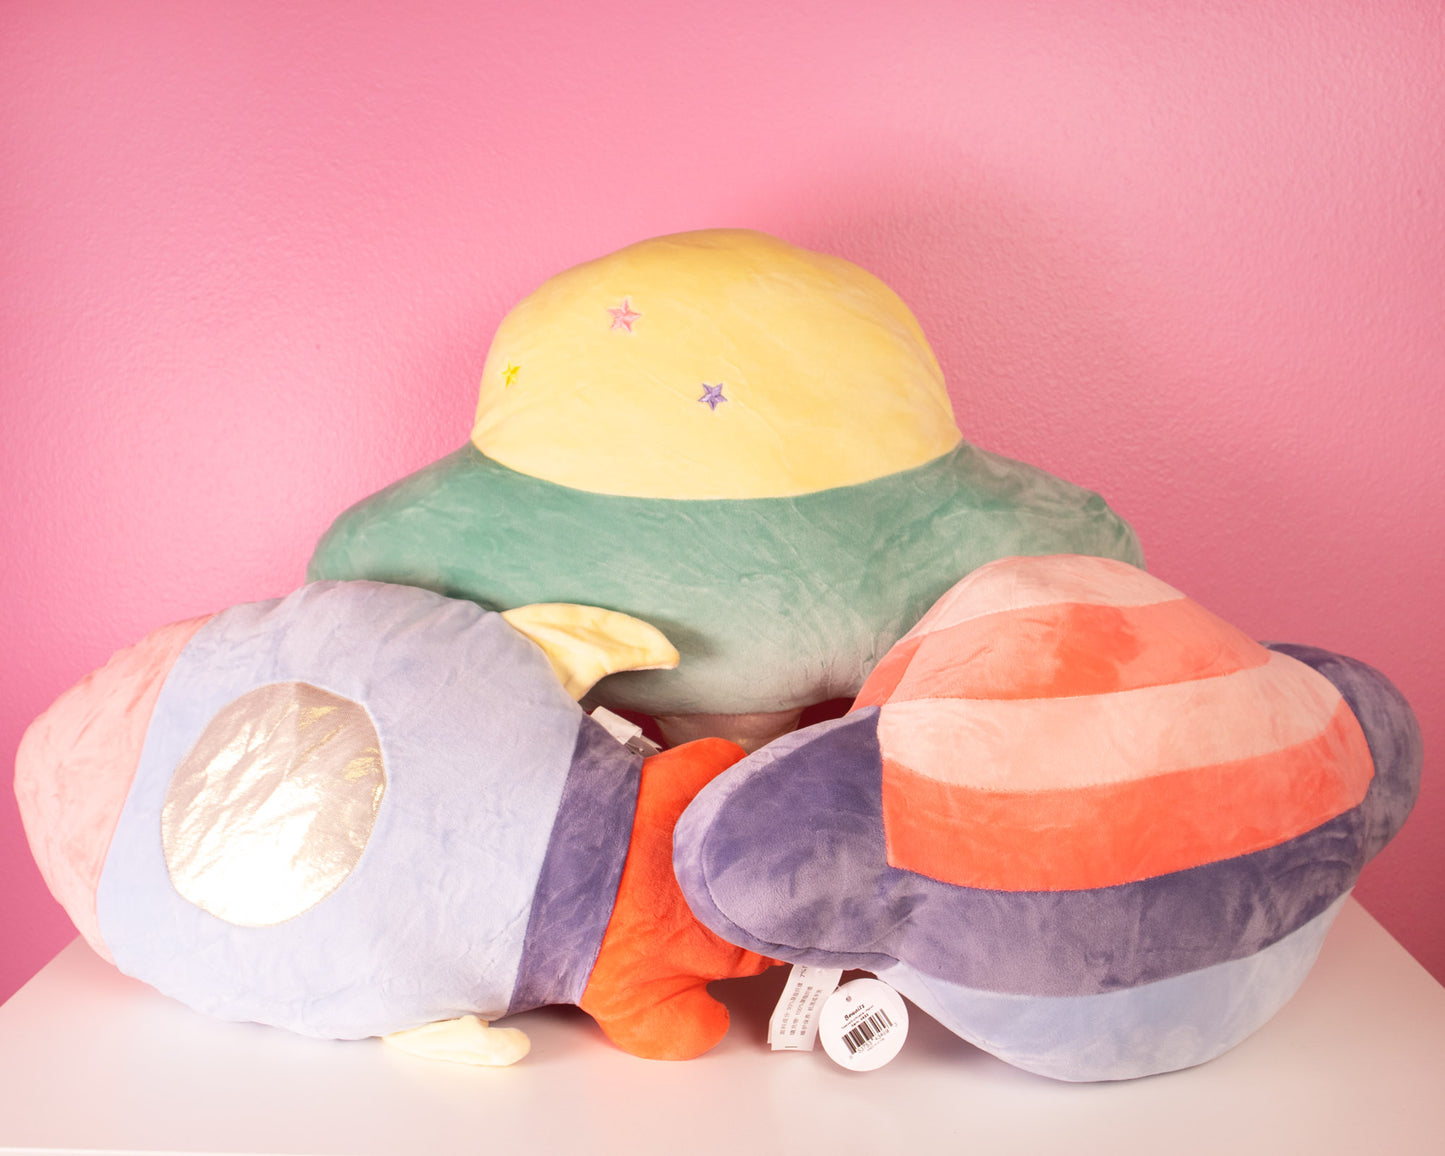 SALE! Spaced Out Plushie - UFO Alien Spaceship